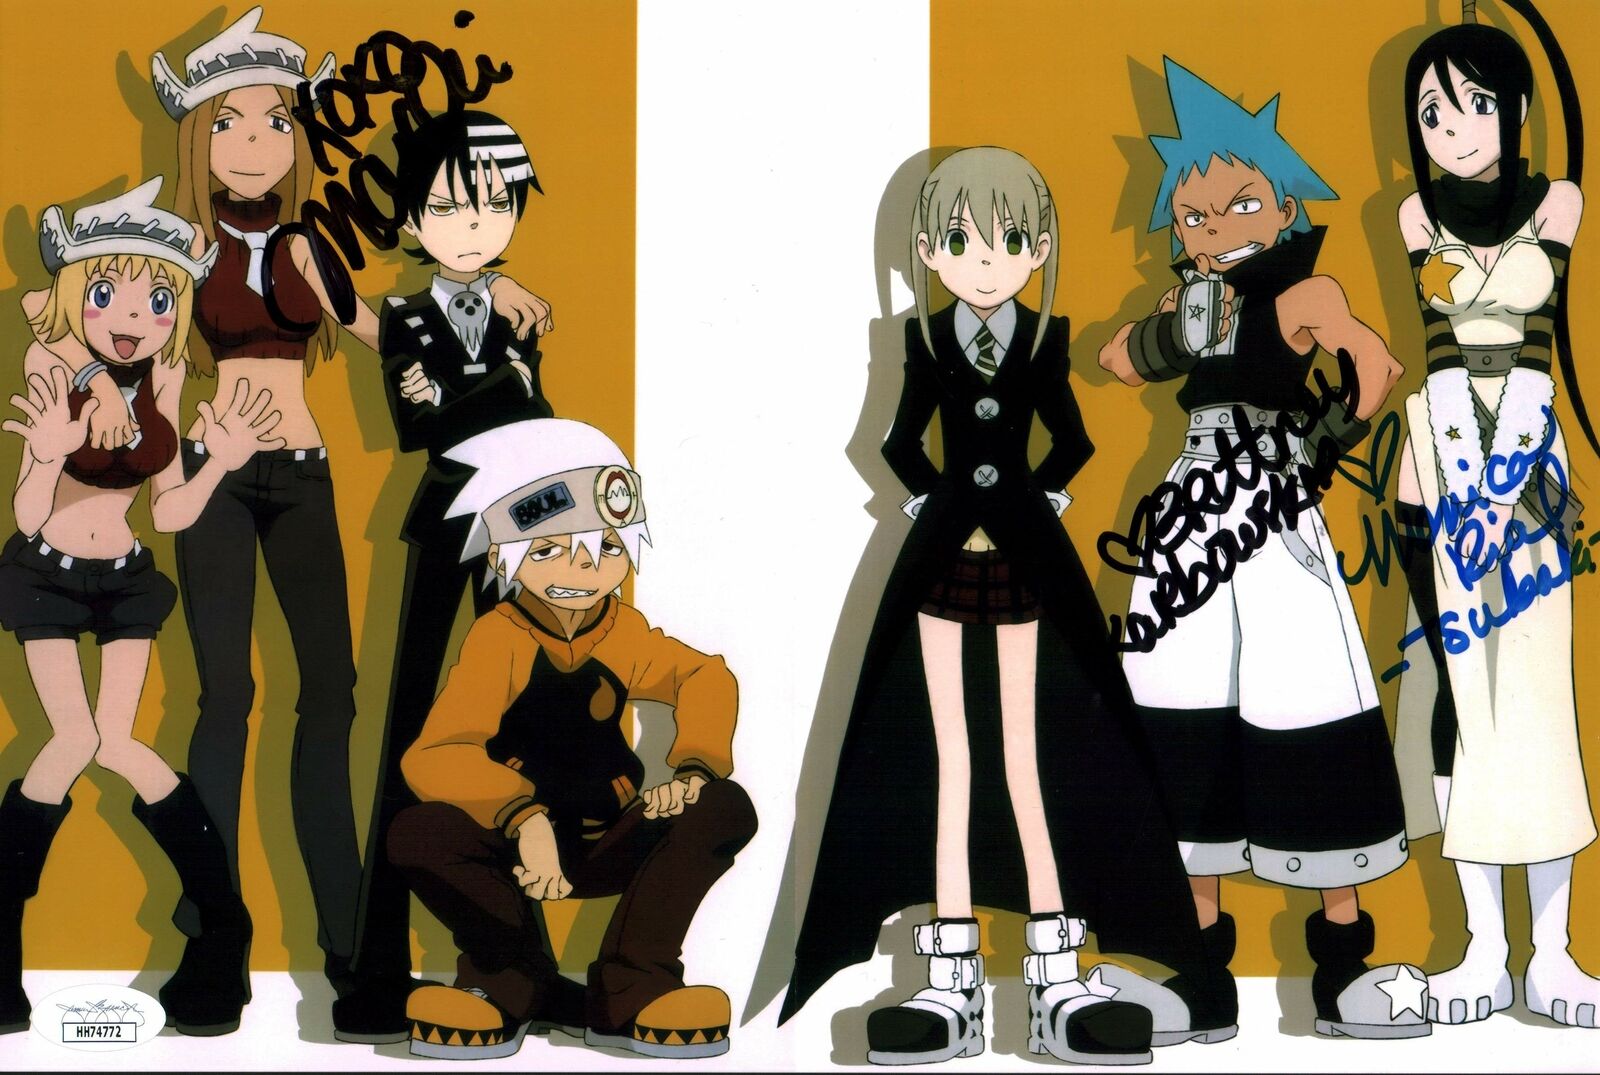 Soul Eater 8x12 Photo Poster painting Signed Autograph Rial Karbowski Marchi JSA Certified COA